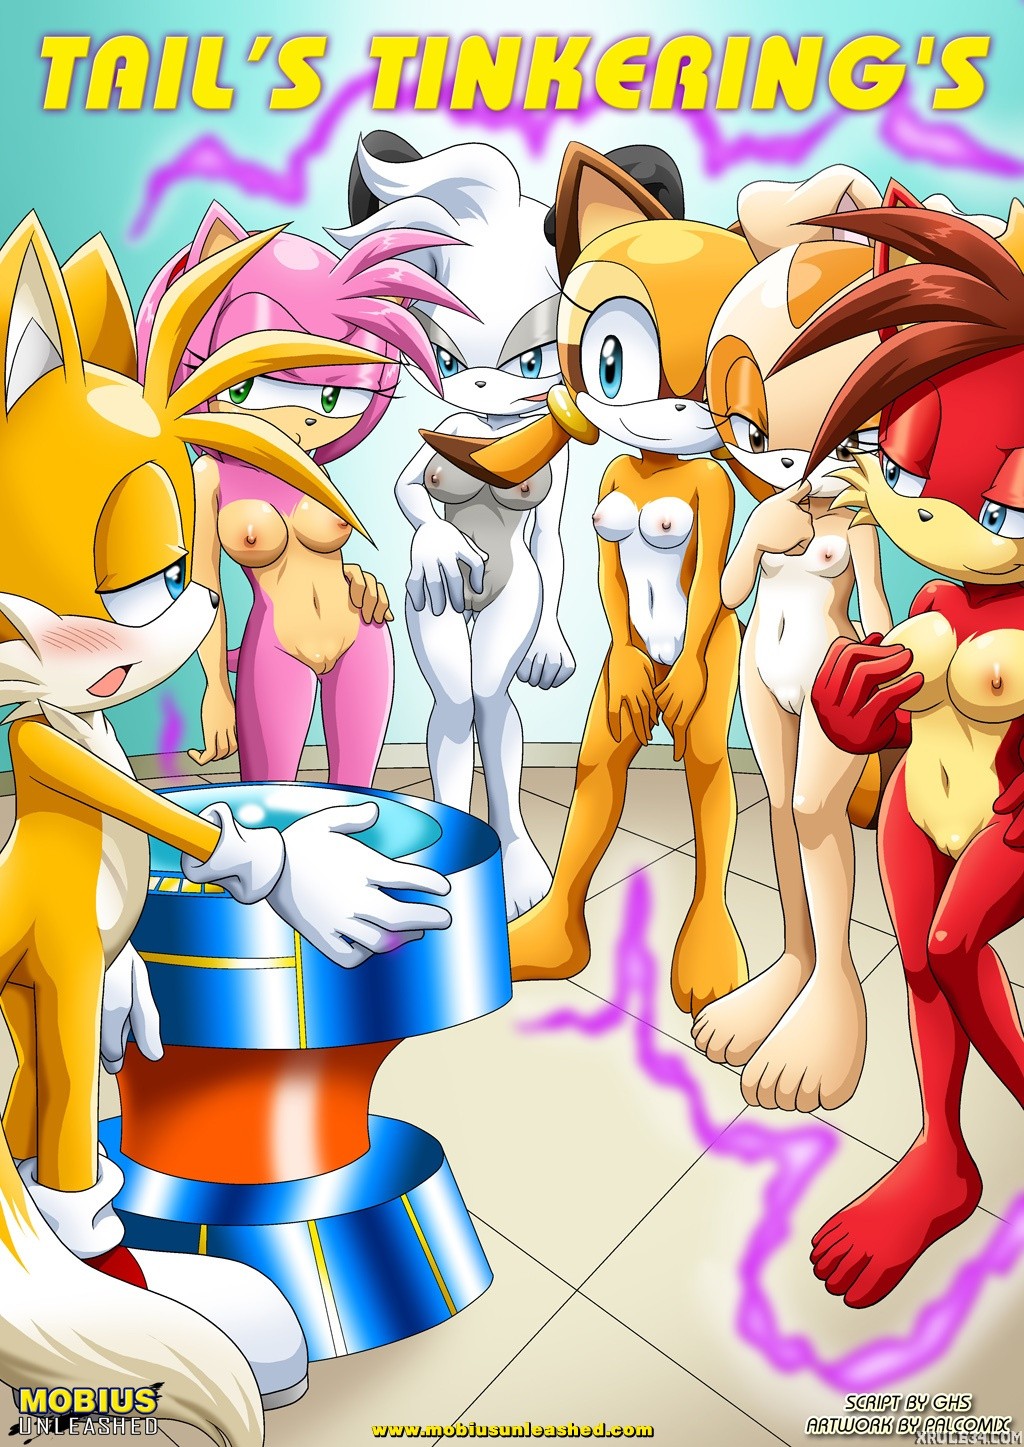 Tails Tinkering’s